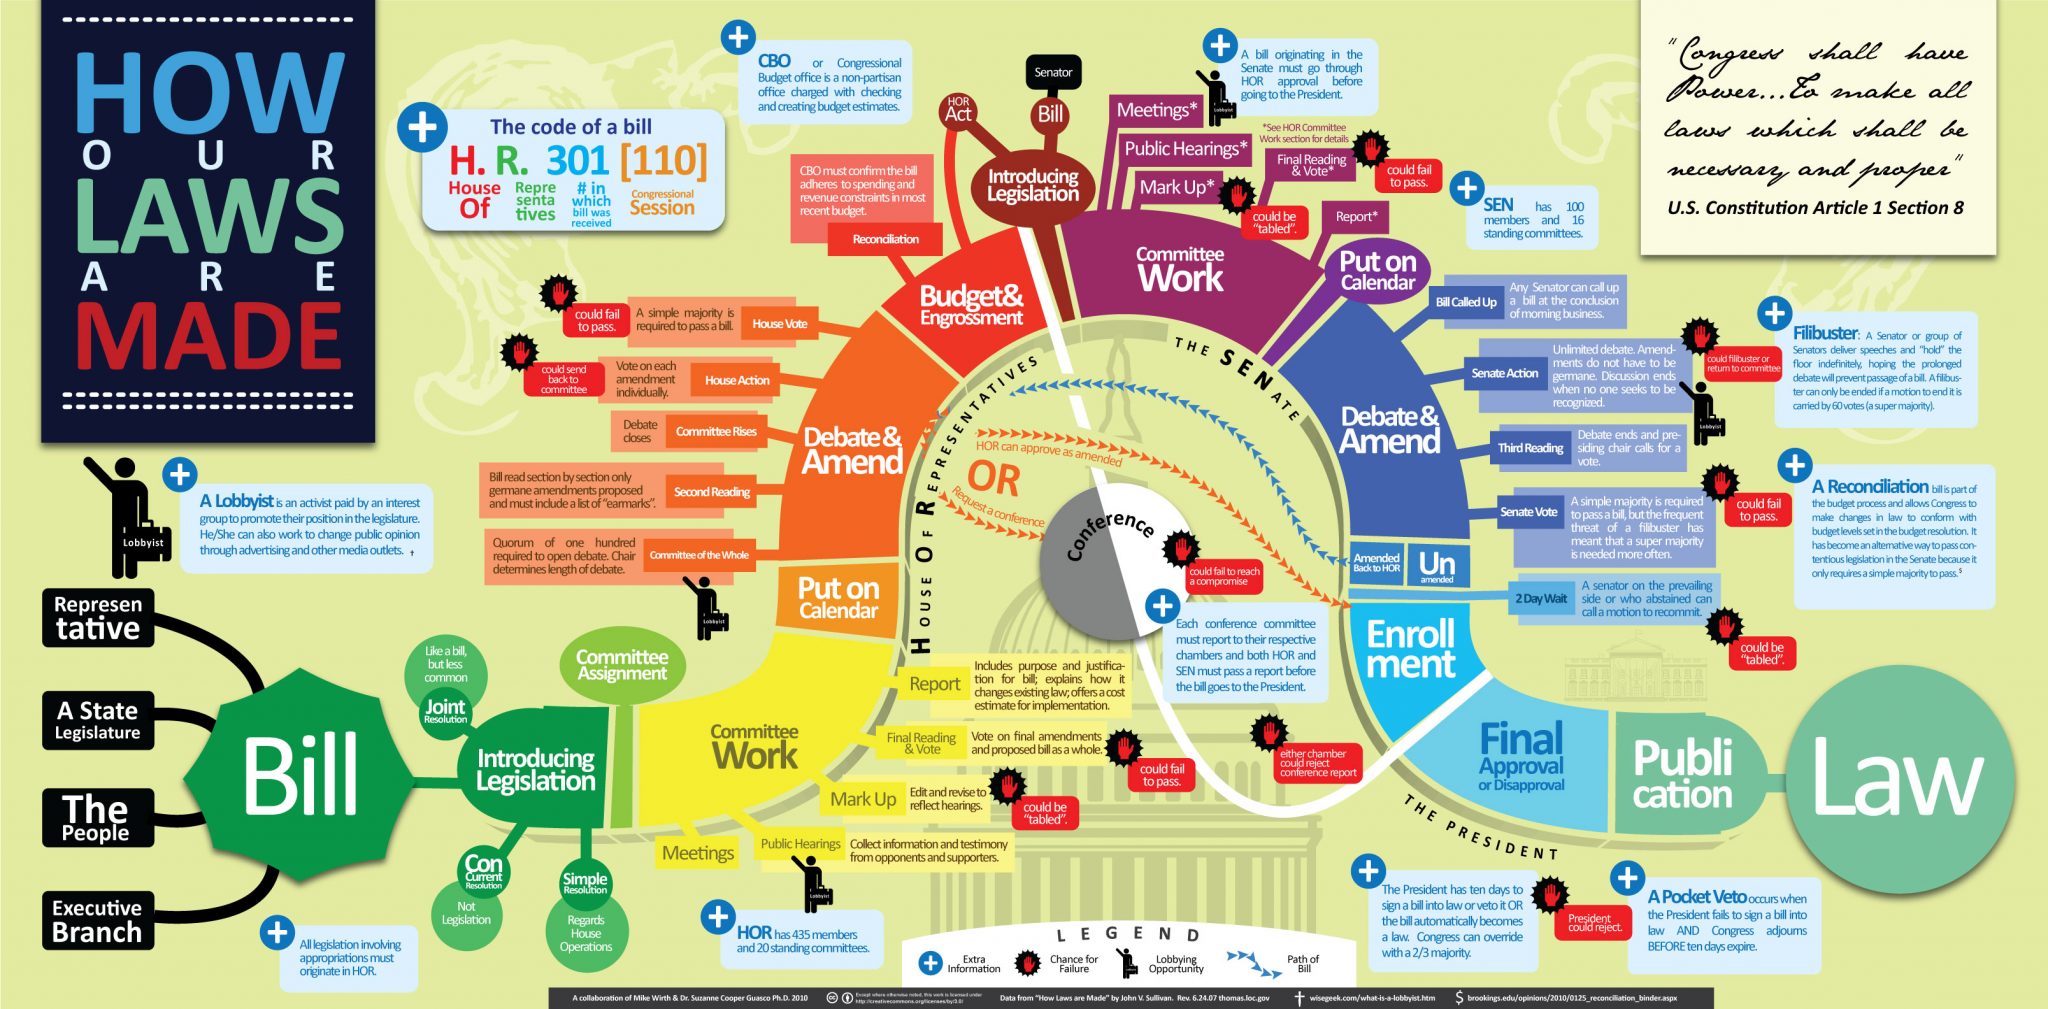 how-laws-are-made-infographic-healing-law-legal-news-and-information